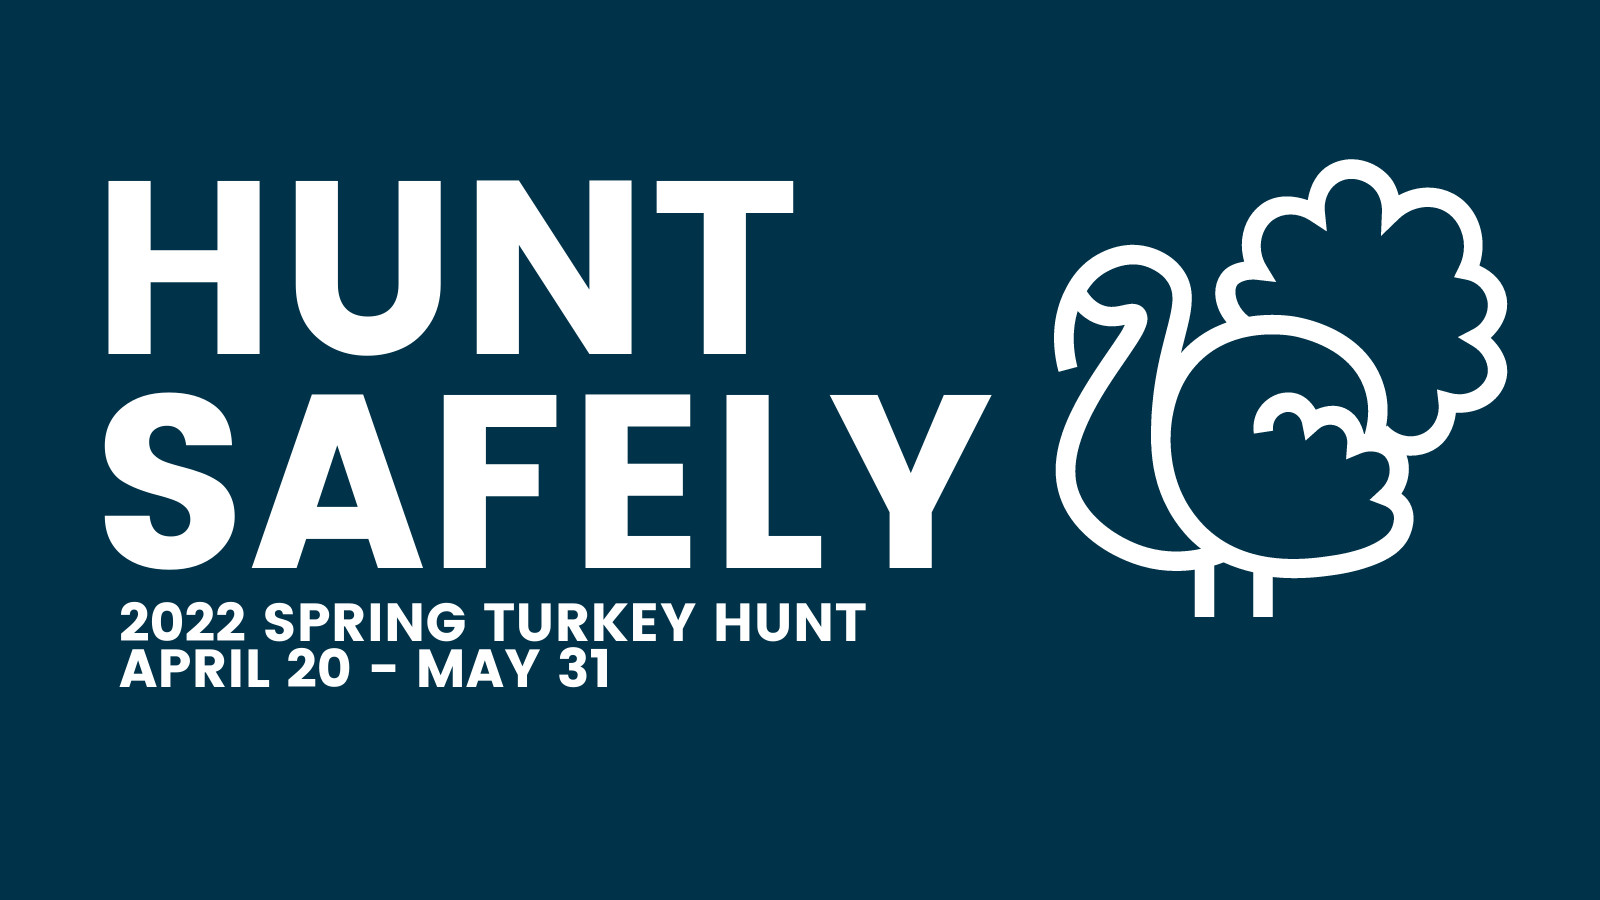 graphic reading "hunt safely, 2022 spring turkey hunt april 20 - may 31" with image of turkey